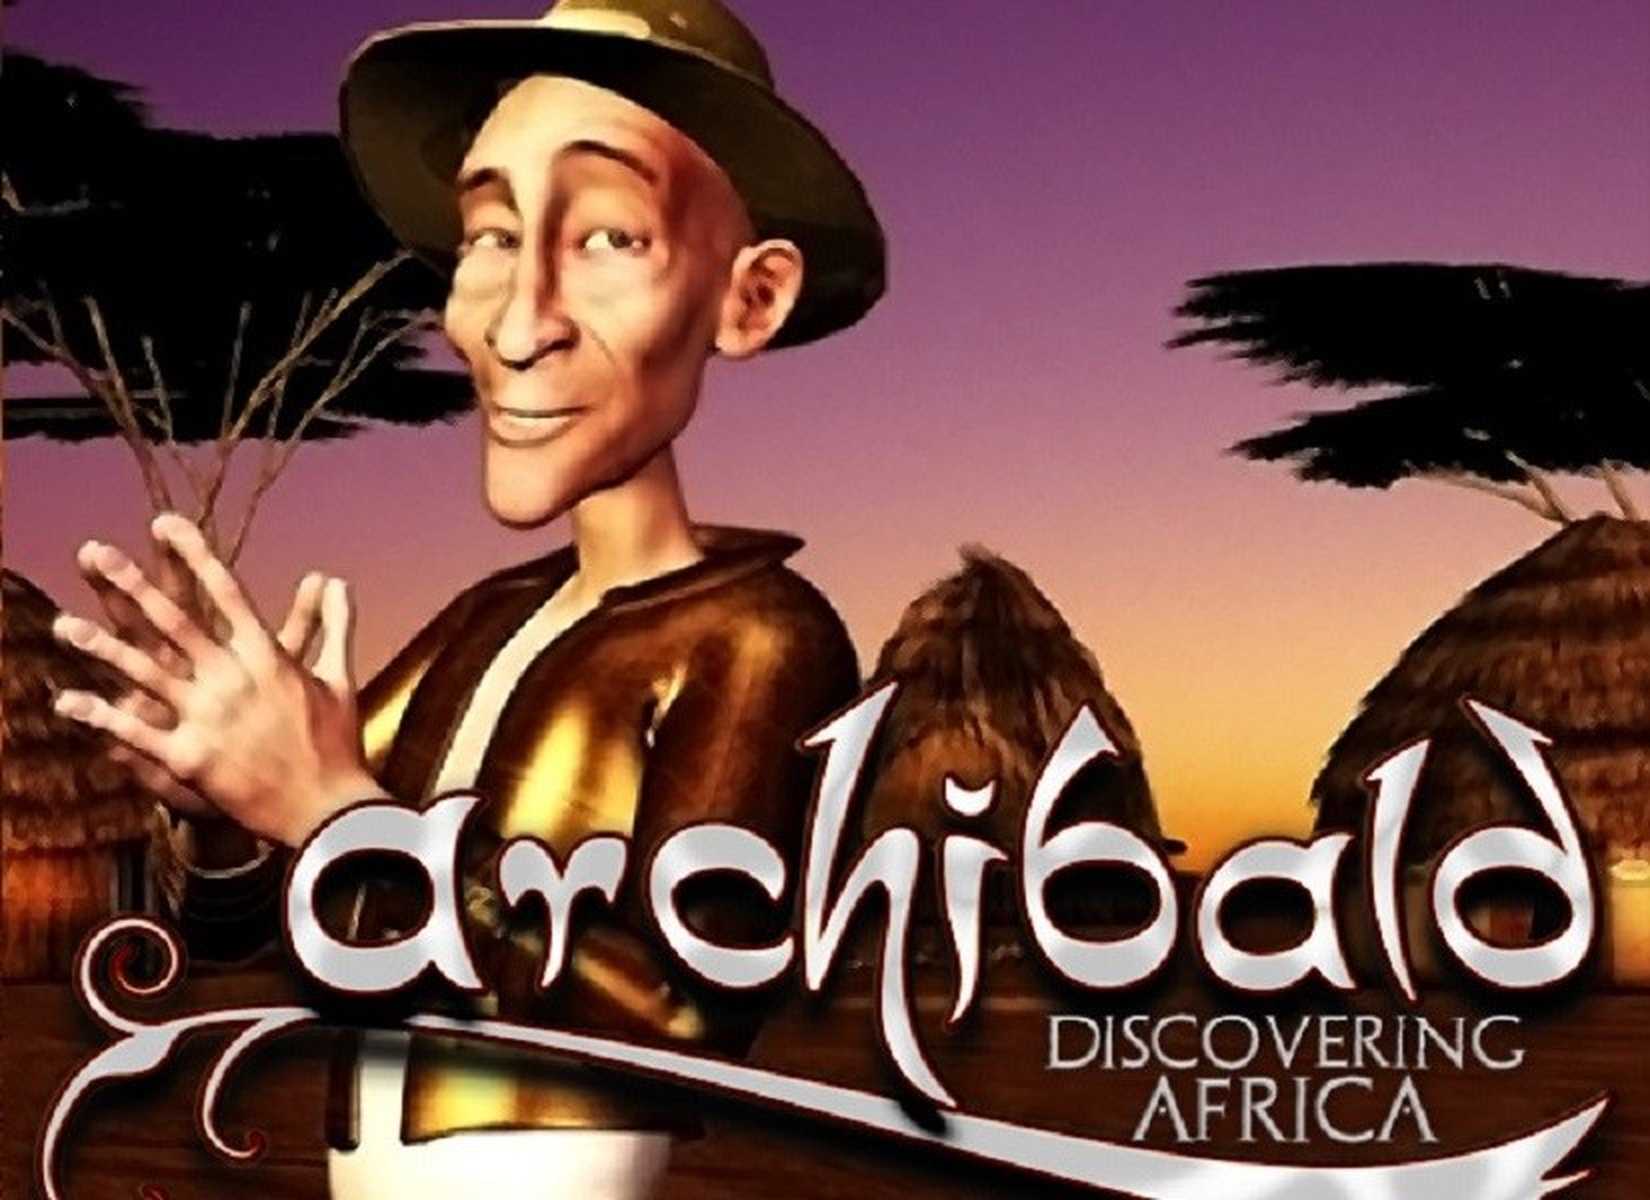 The Archibald Discovering Africa HD Online Slot Demo Game by World Match